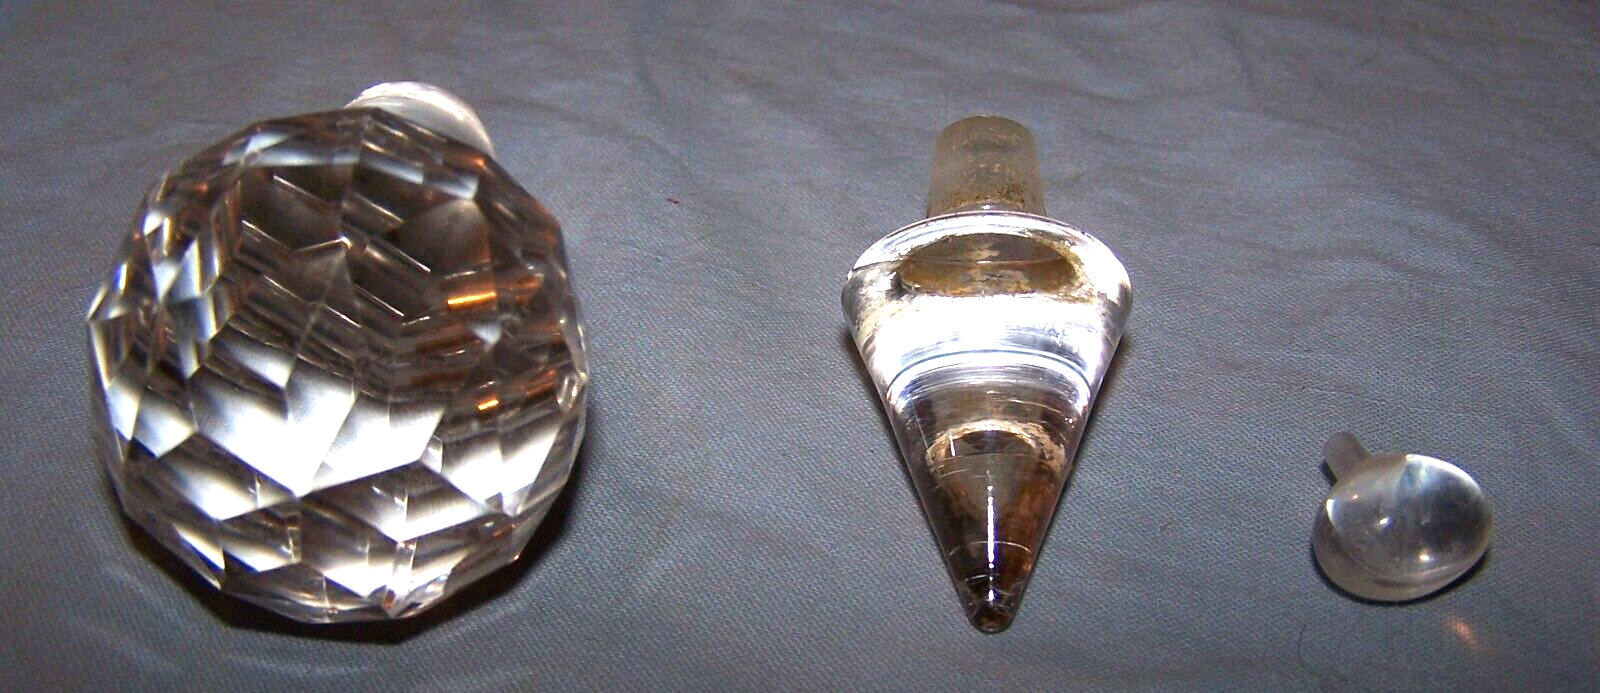 Primary image for Lot of 3 Assorted Size, Shaped Clear Glass Stoppers-Prism Ball, Small Jelly Bean